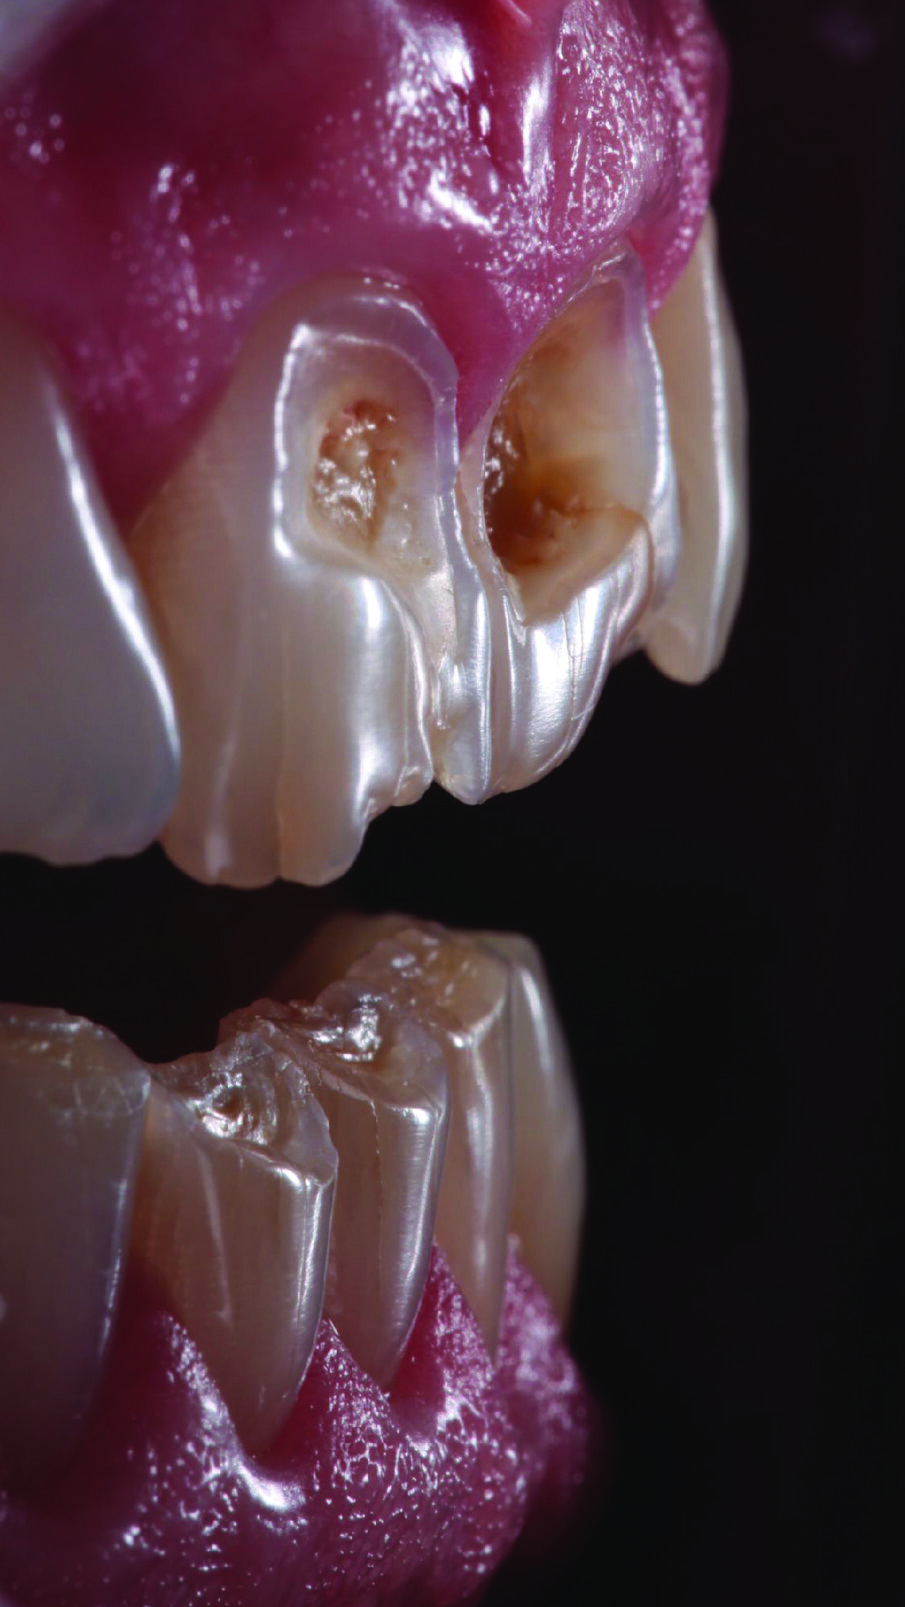 Lateral view of the anterior teeth revealed the depth of the lesions on the vestibular surfaces.